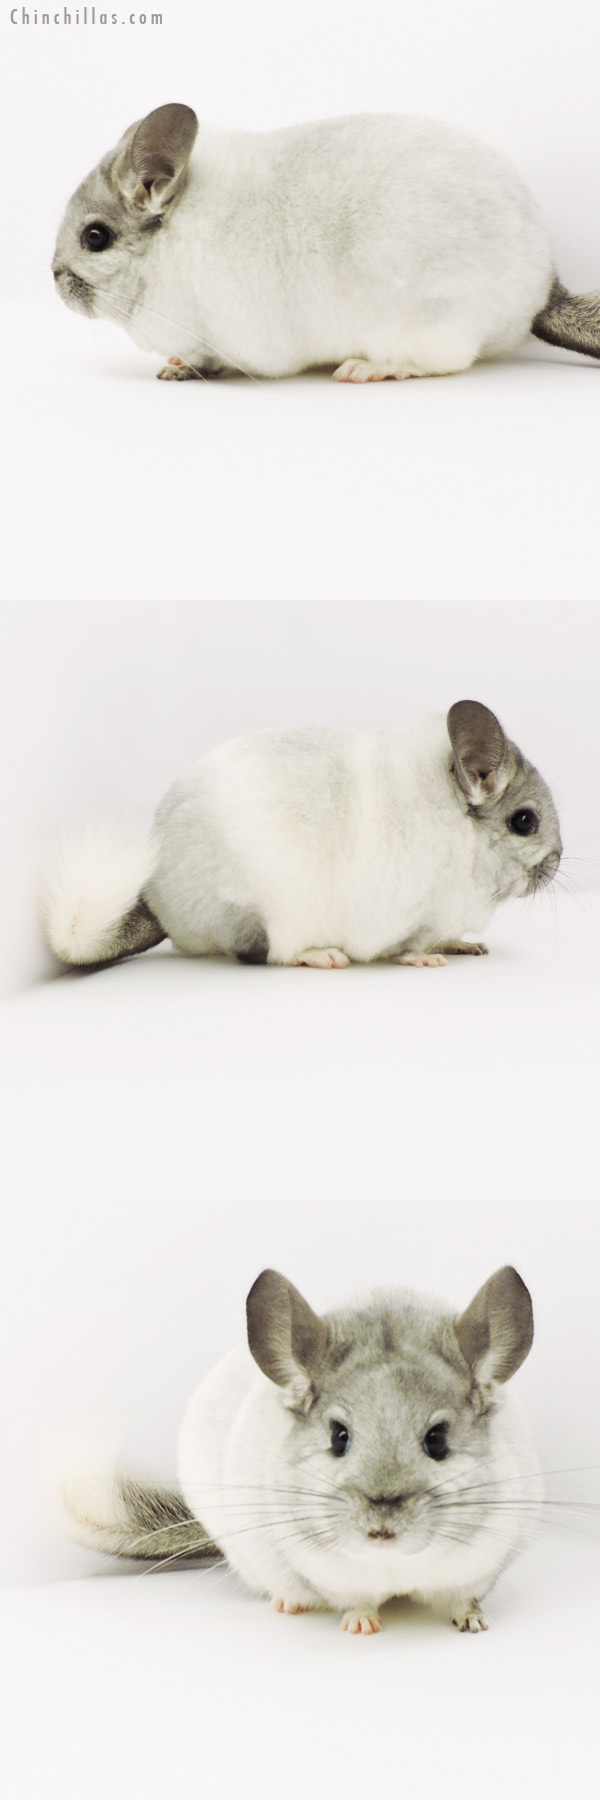 Chinchilla or related item offered for sale or export on Chinchillas.com - 19287 Large Blocky Premium Production Quality White Mosaic Female Chinchilla